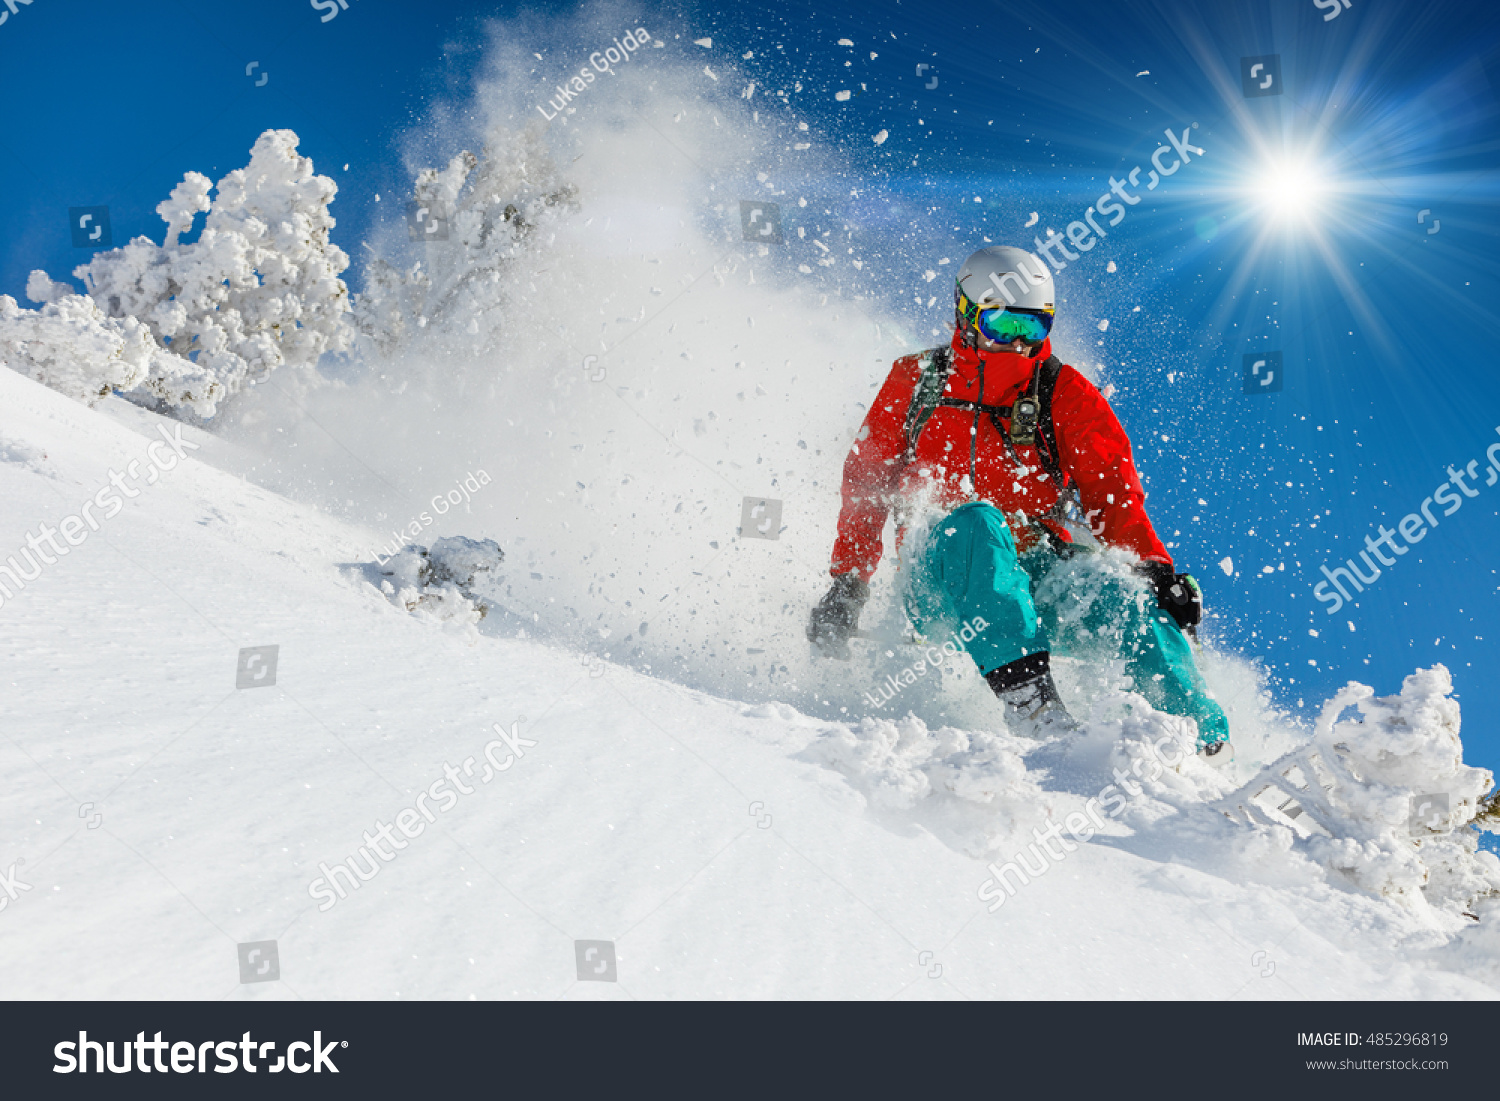 Skier skiing downhill in high mountains #485296819